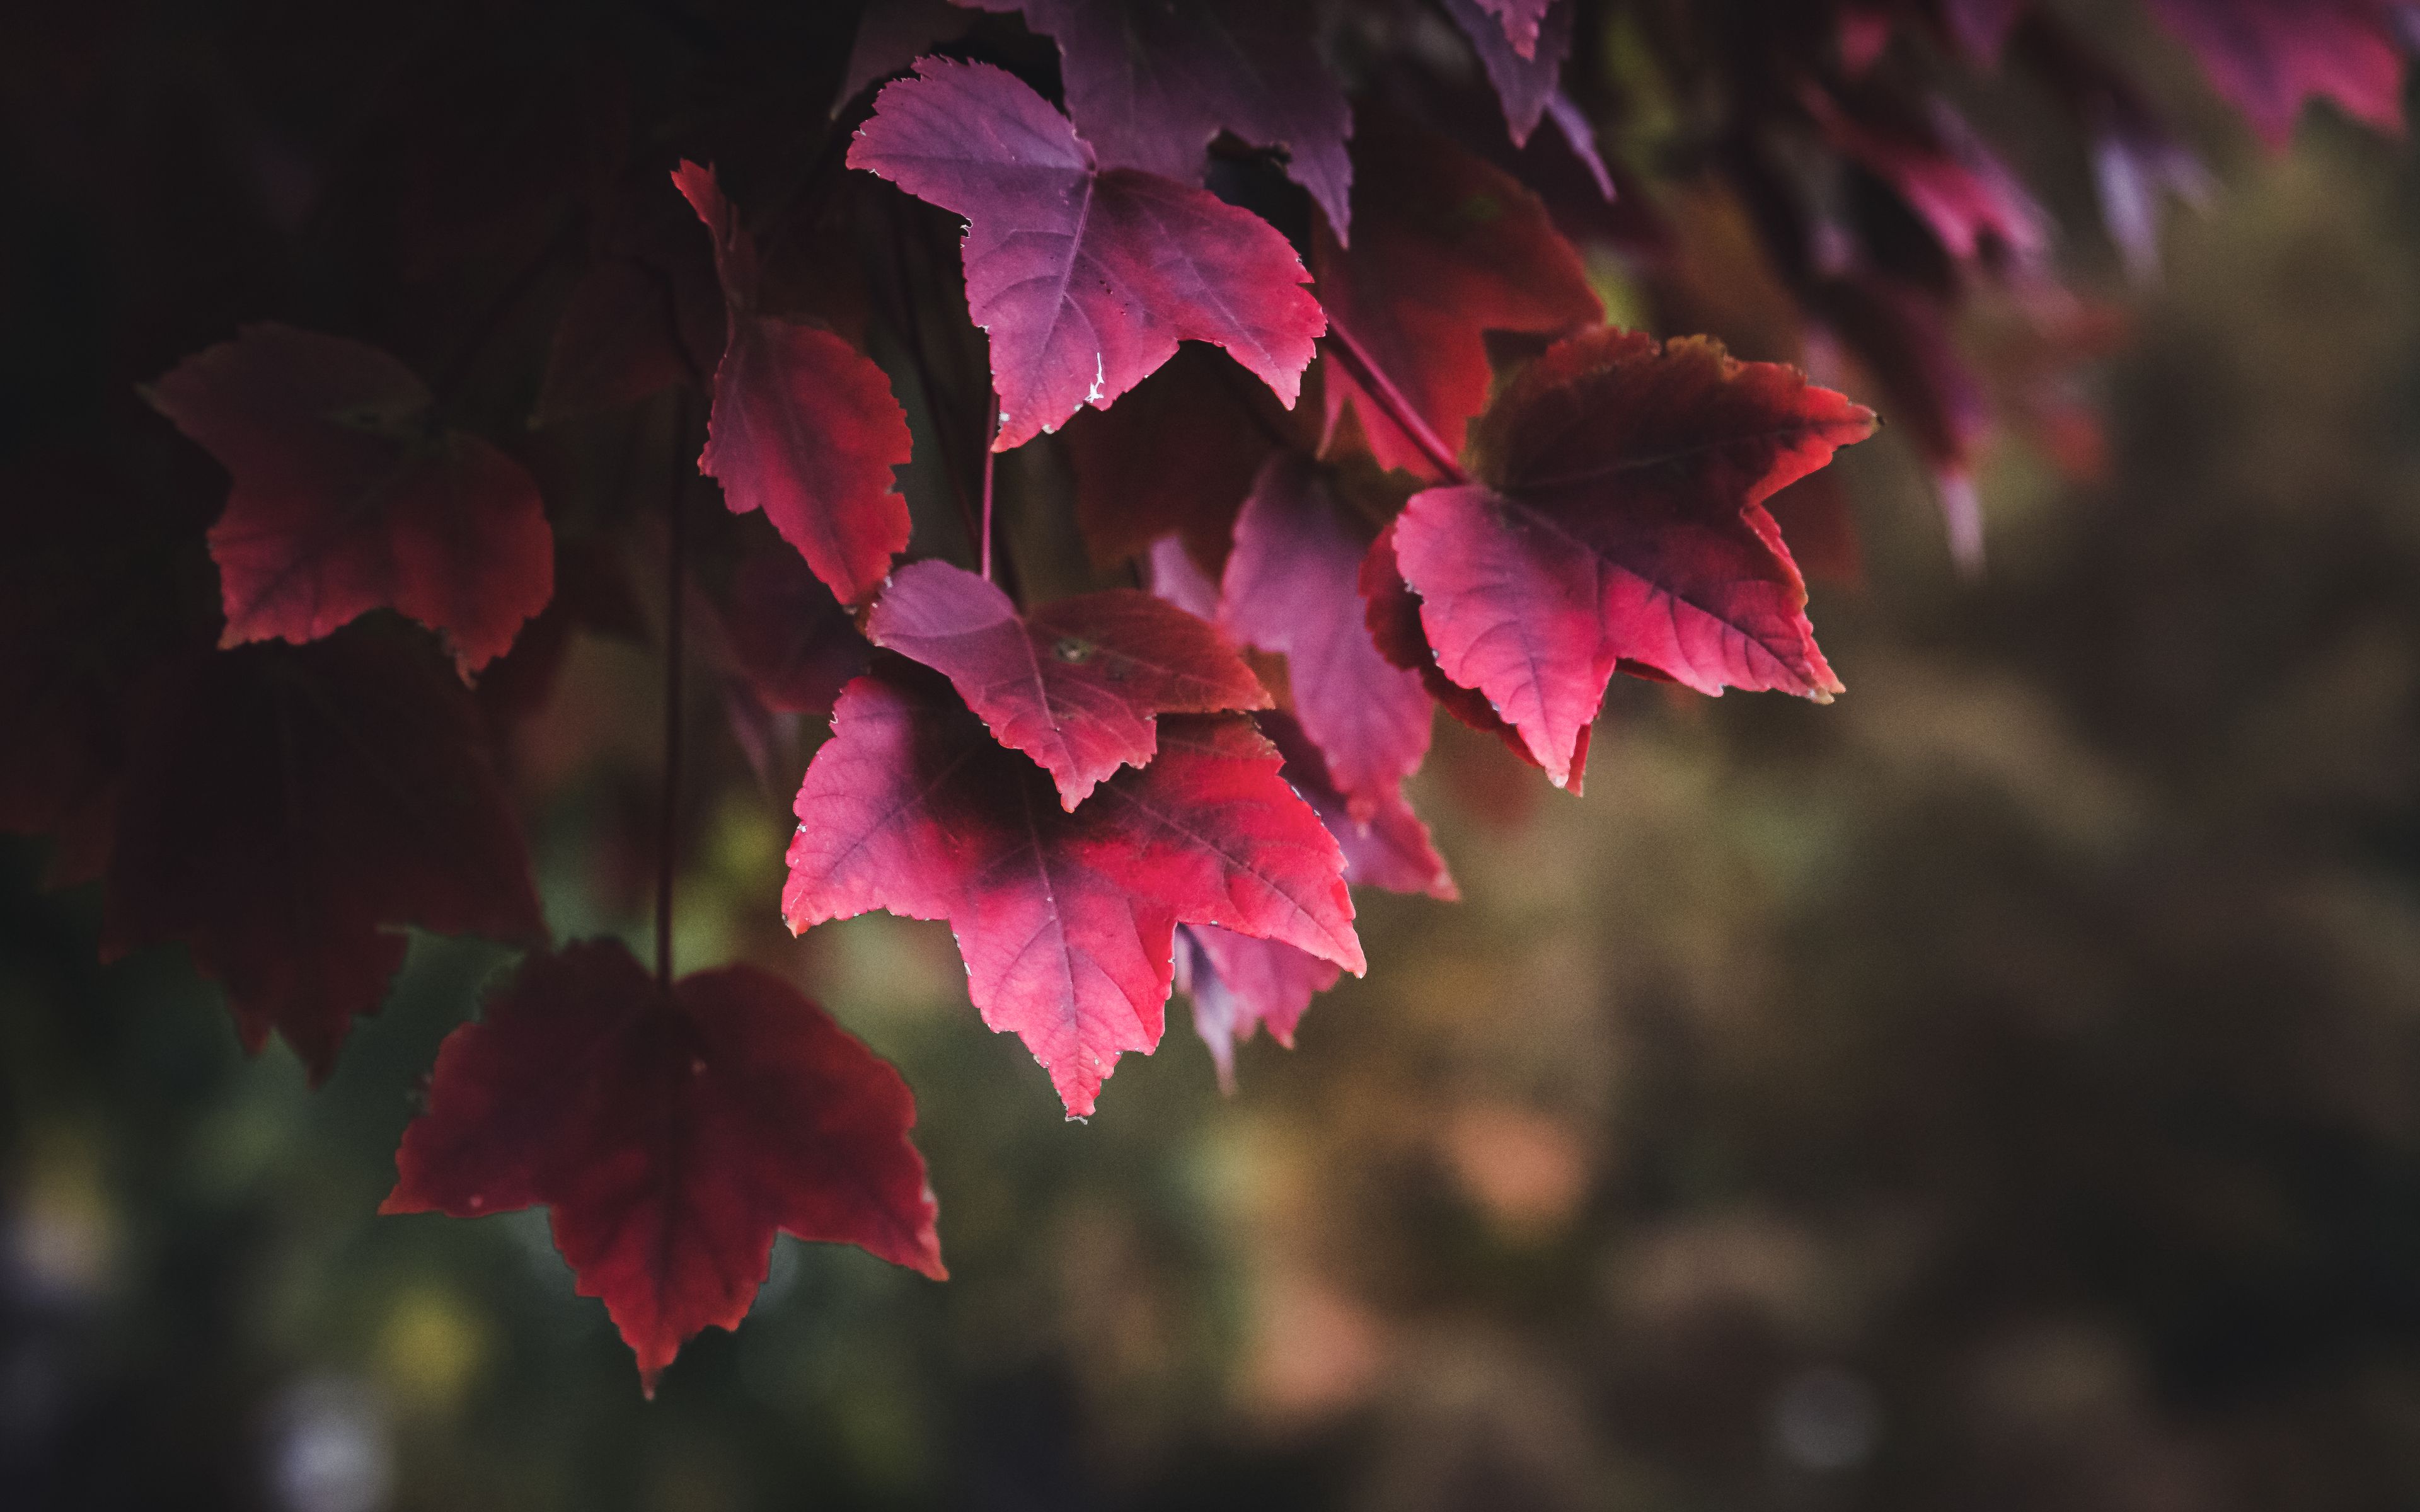 Download wallpaper 3840x2400 leaves, red, plant, nature 4k ultra hd 16: